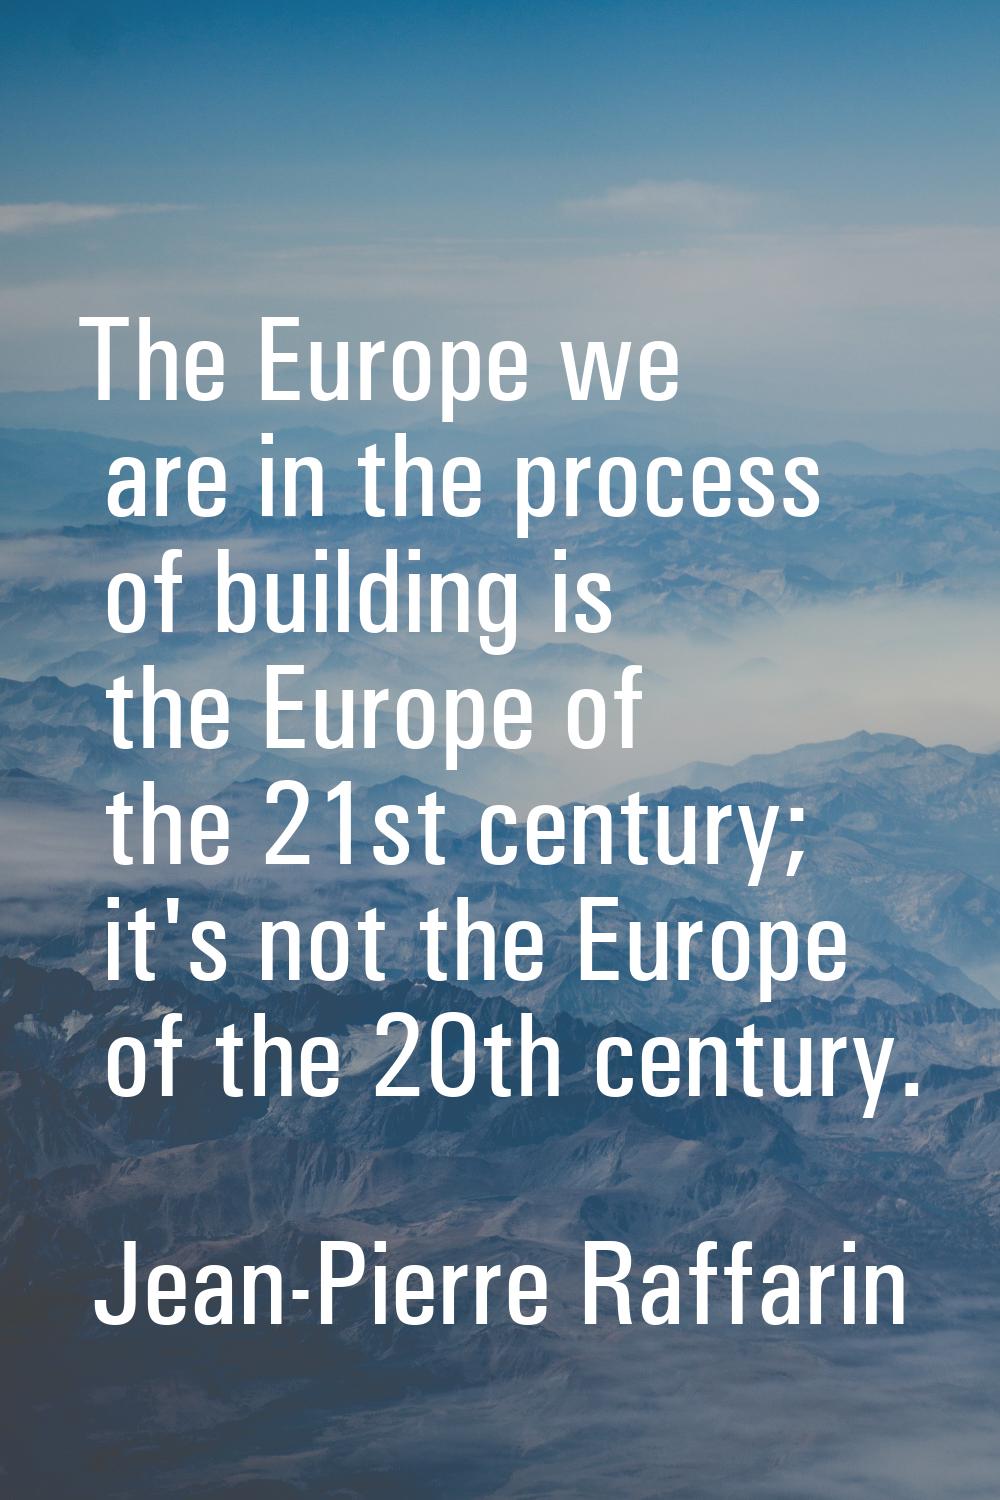 The Europe we are in the process of building is the Europe of the 21st century; it's not the Europe